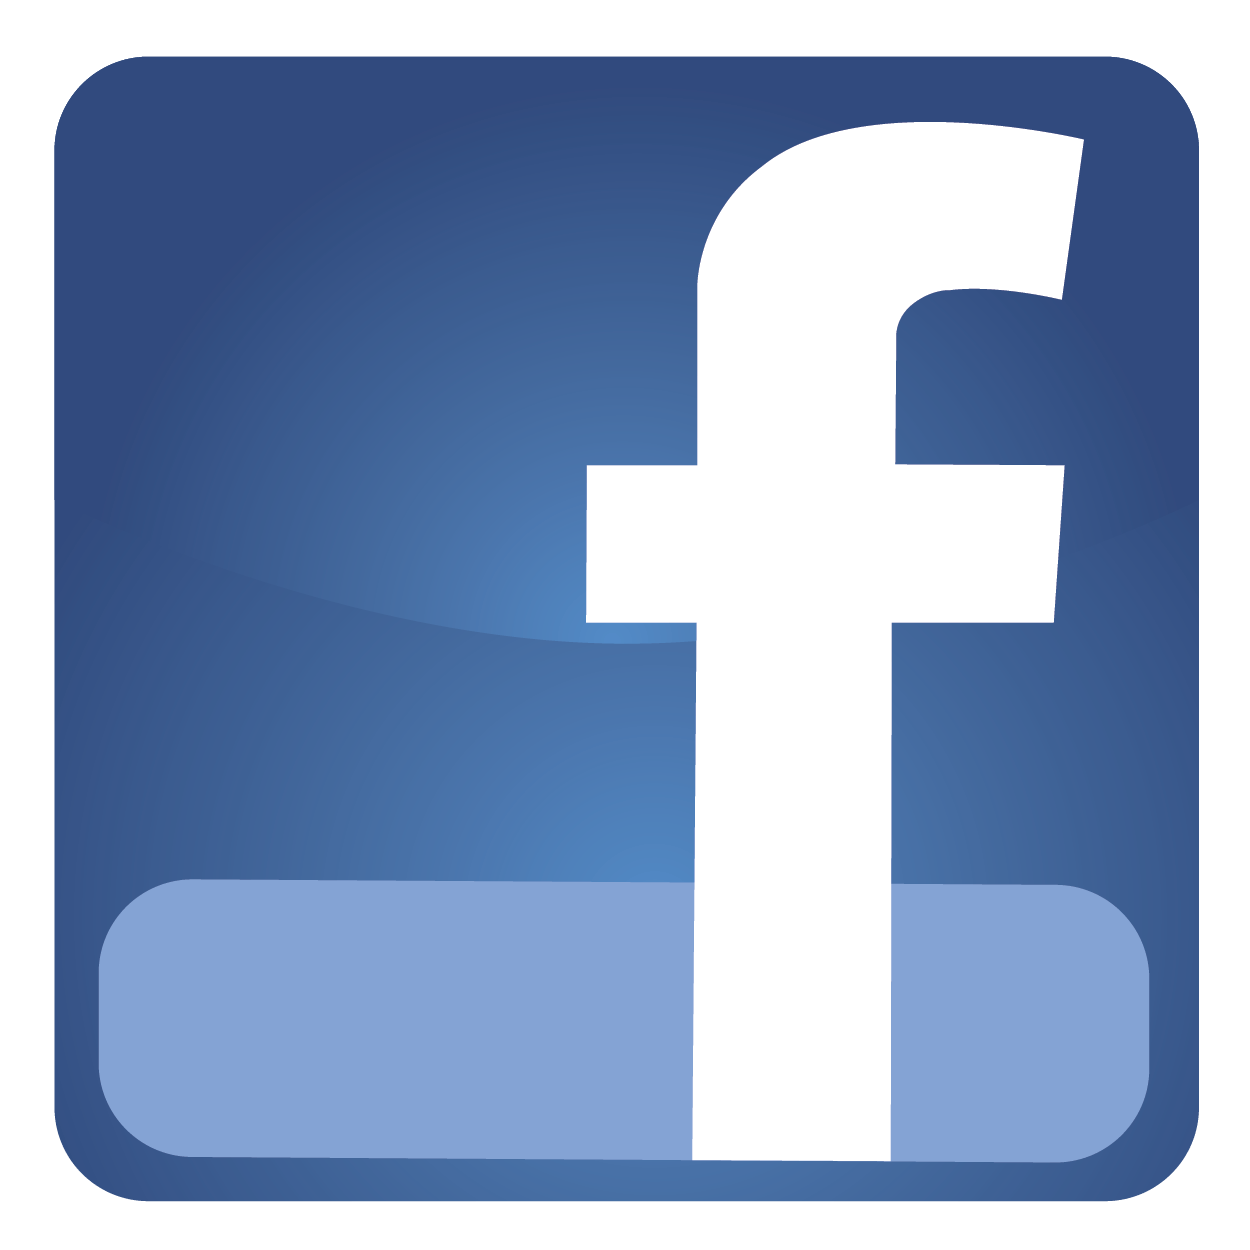 Follow Me On Facebook Logo - Facebook Free Vector #741 - Free Icons and PNG Backgrounds